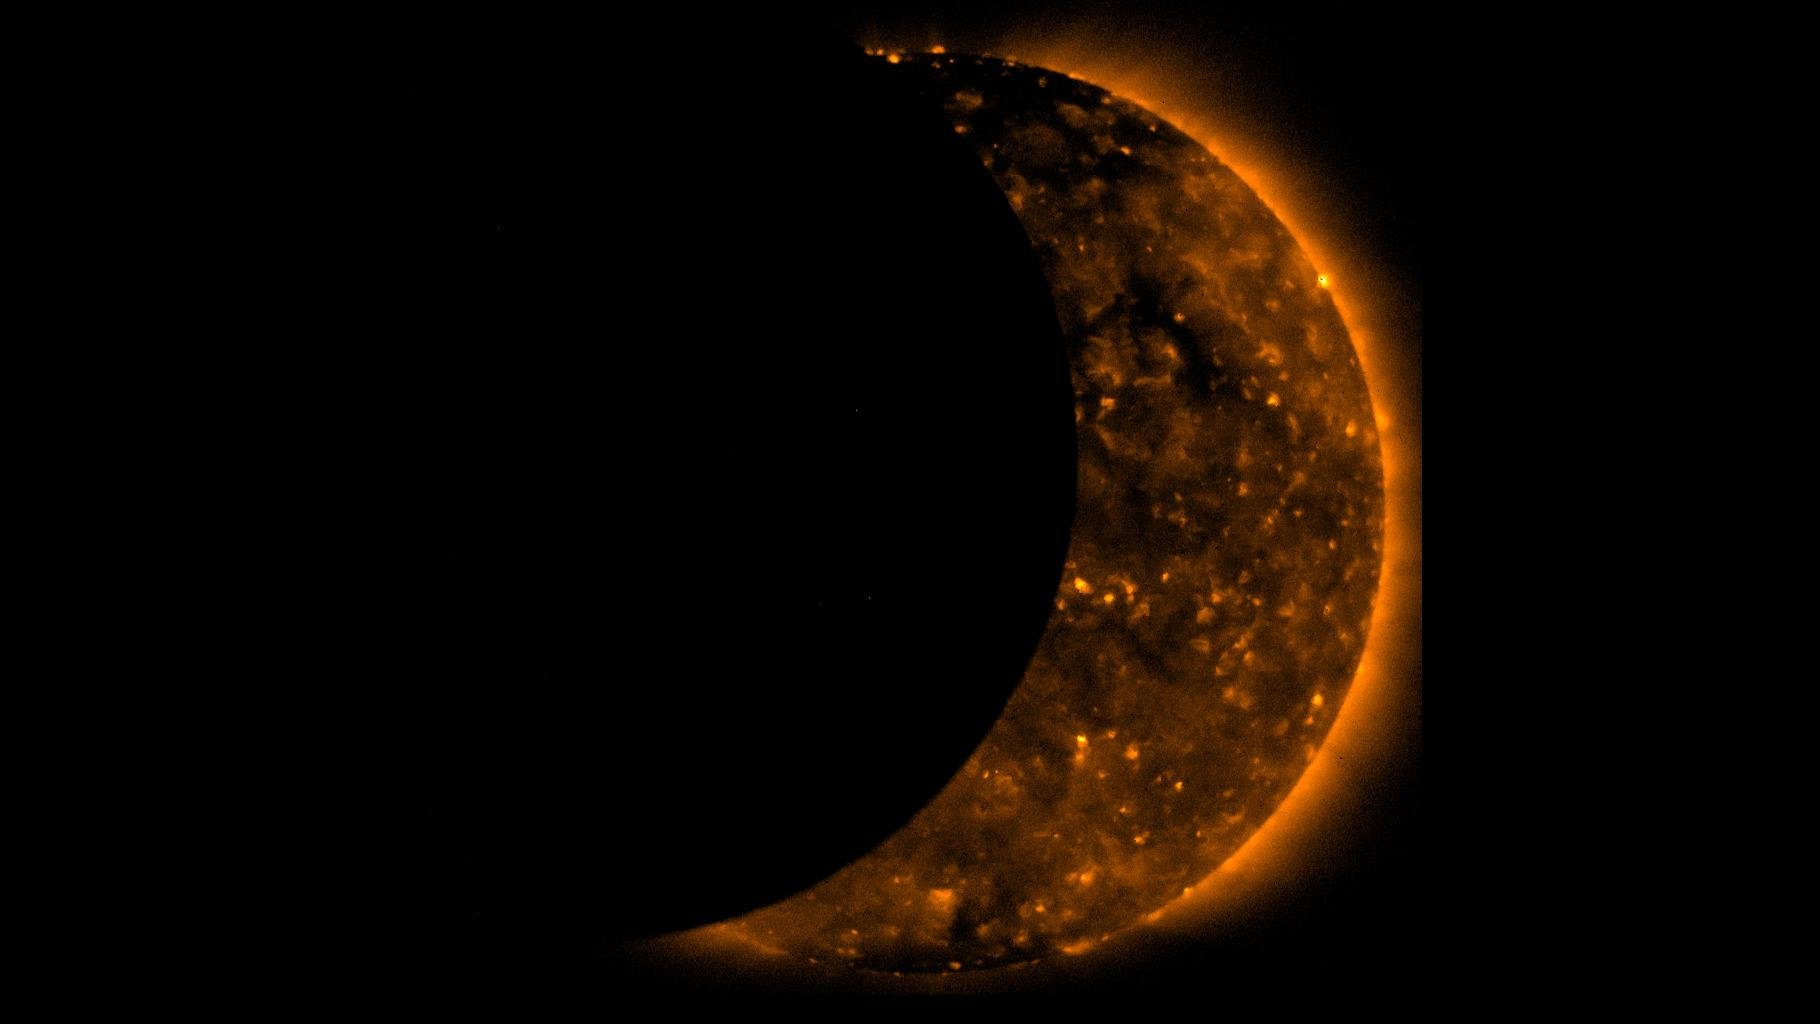 A total solar eclipse, which is when the Moon completely covers the Sun, will occur across 14 states in the continental U.S. on Aug 21, 2017. (Credit: NASA)